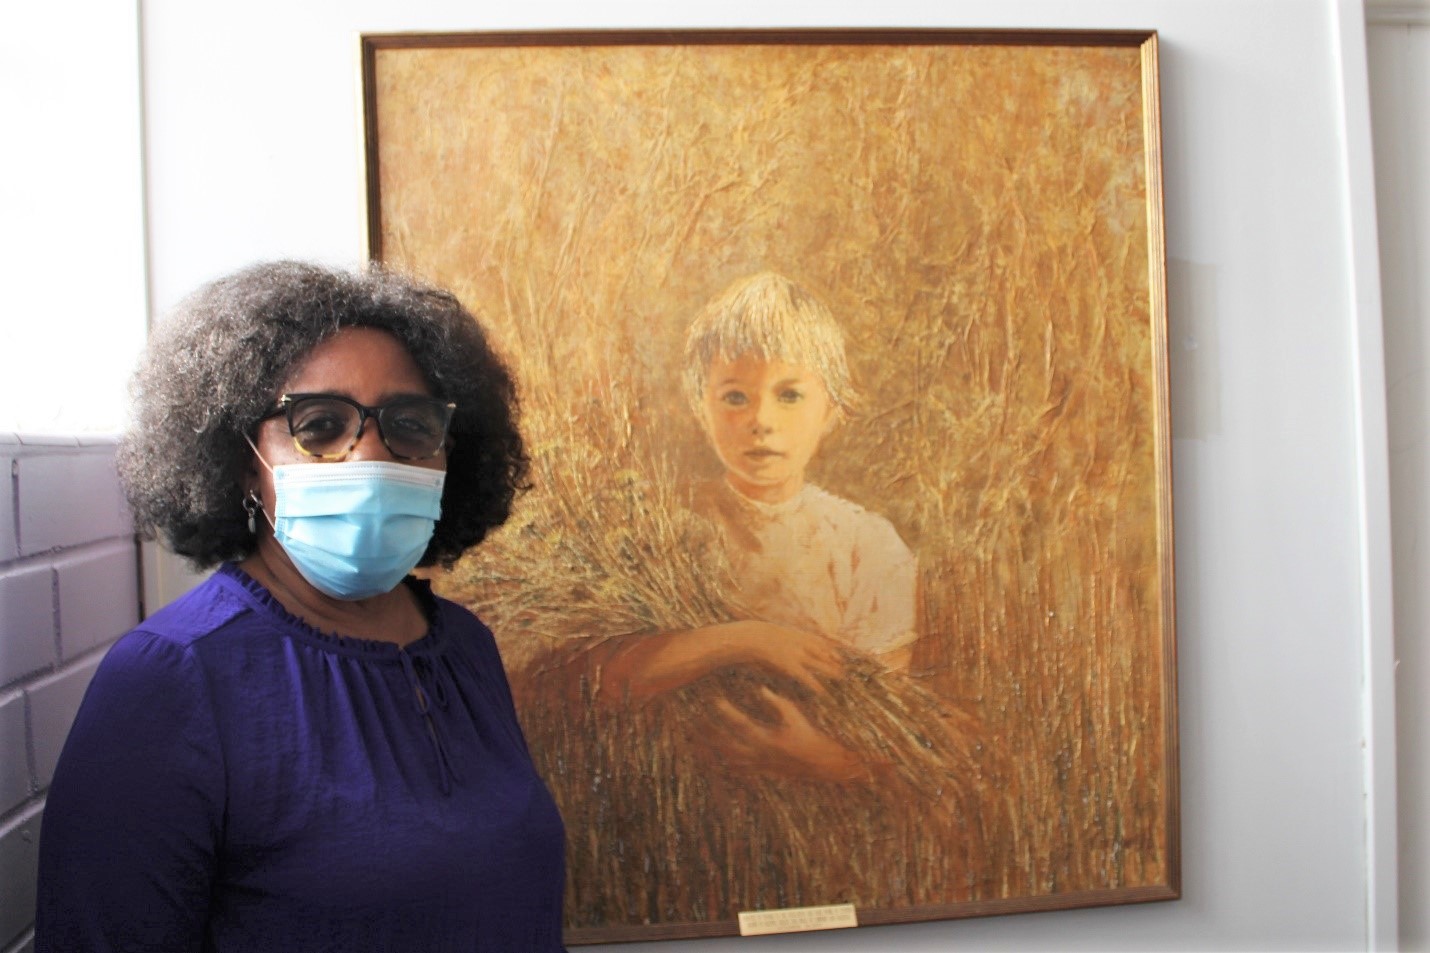 Cynthia Brown wears mask next to painting of a boy.